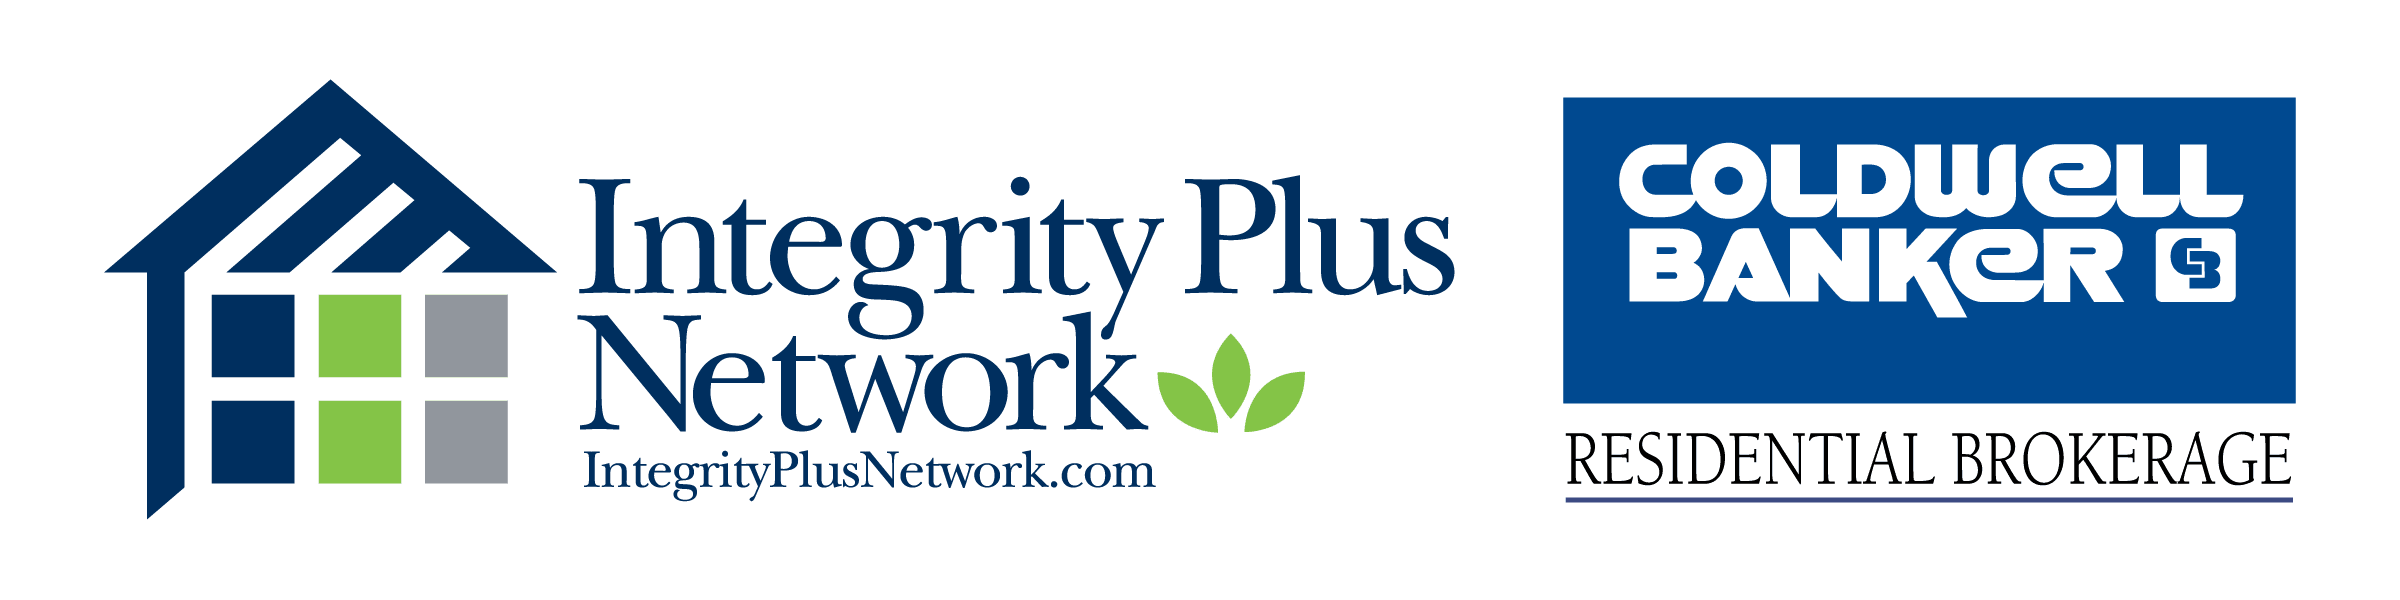 Integrity Plus download the new version